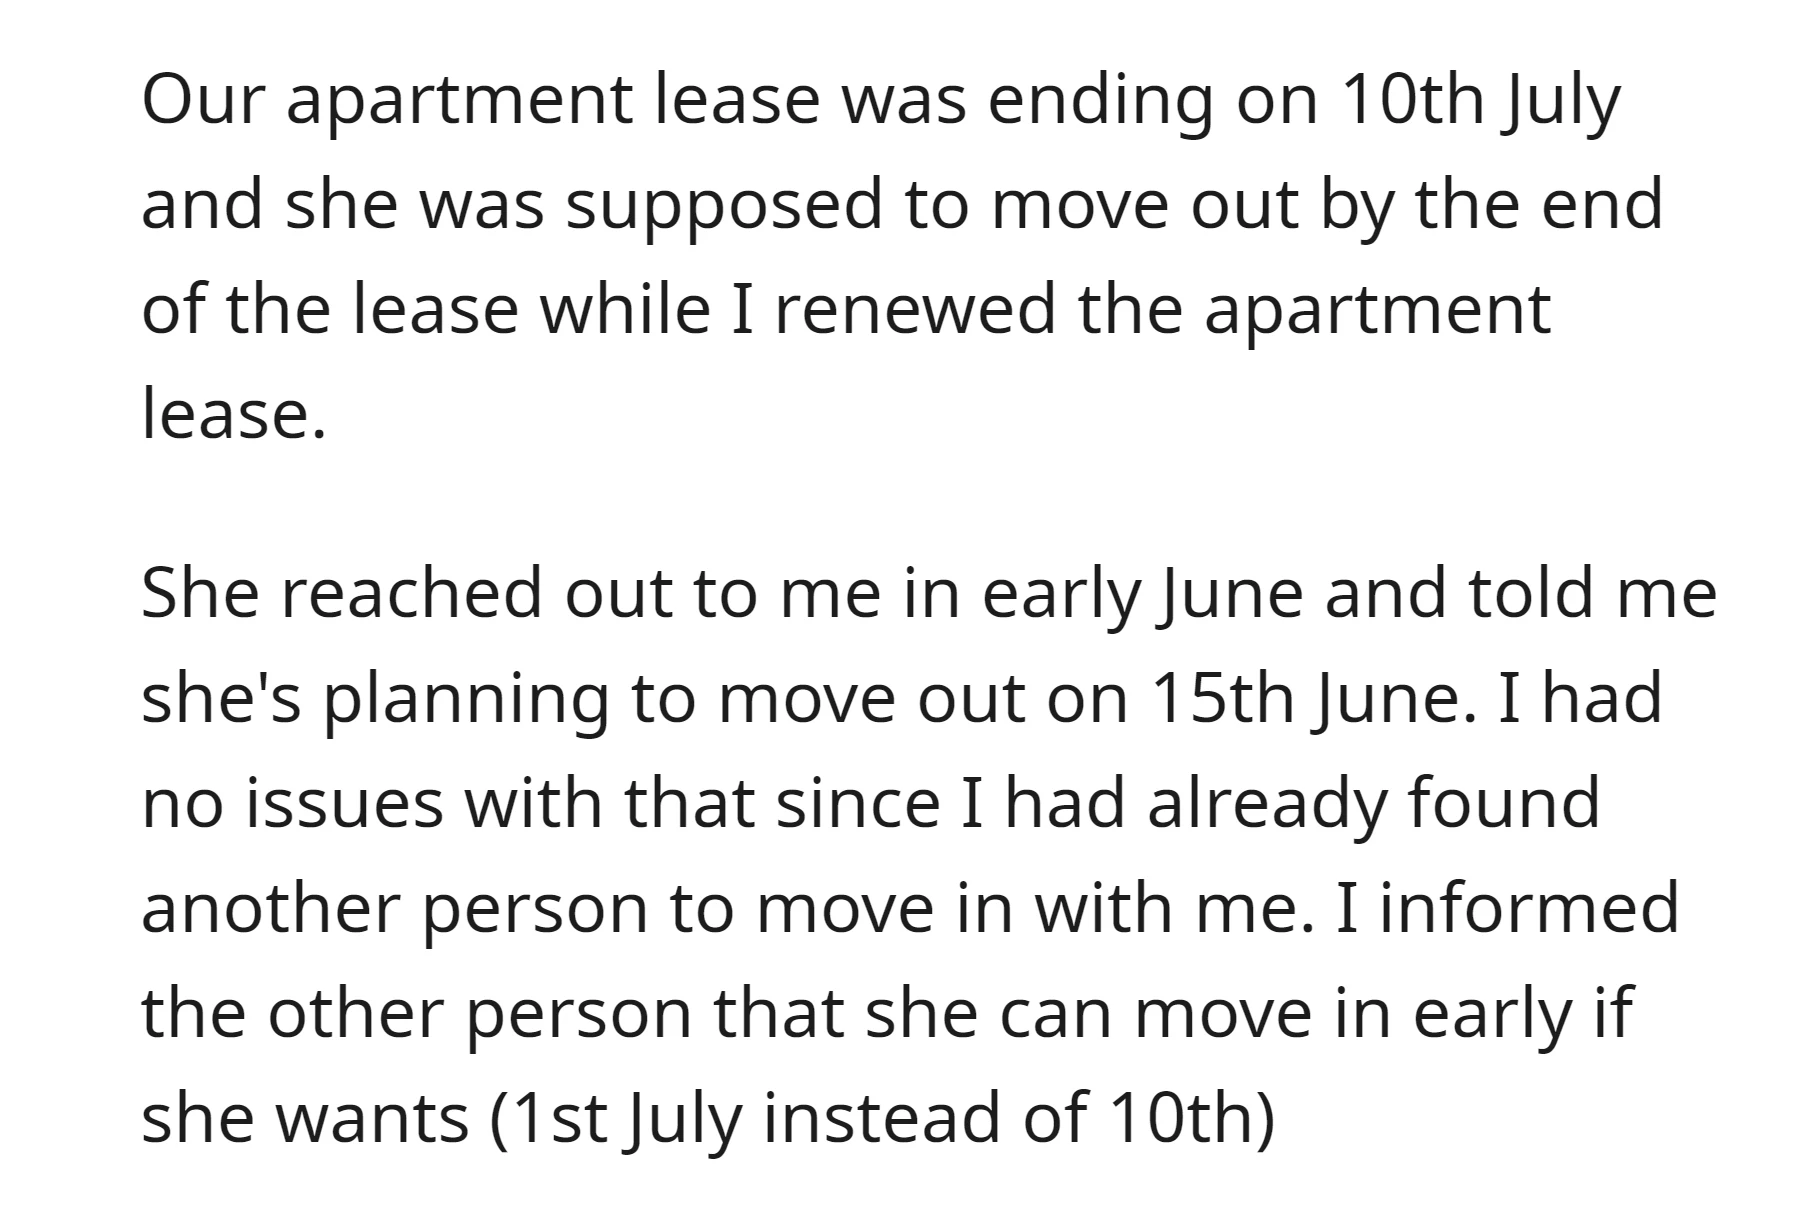 OP had to find a new roommate because her ex-roommate moved out before the lease